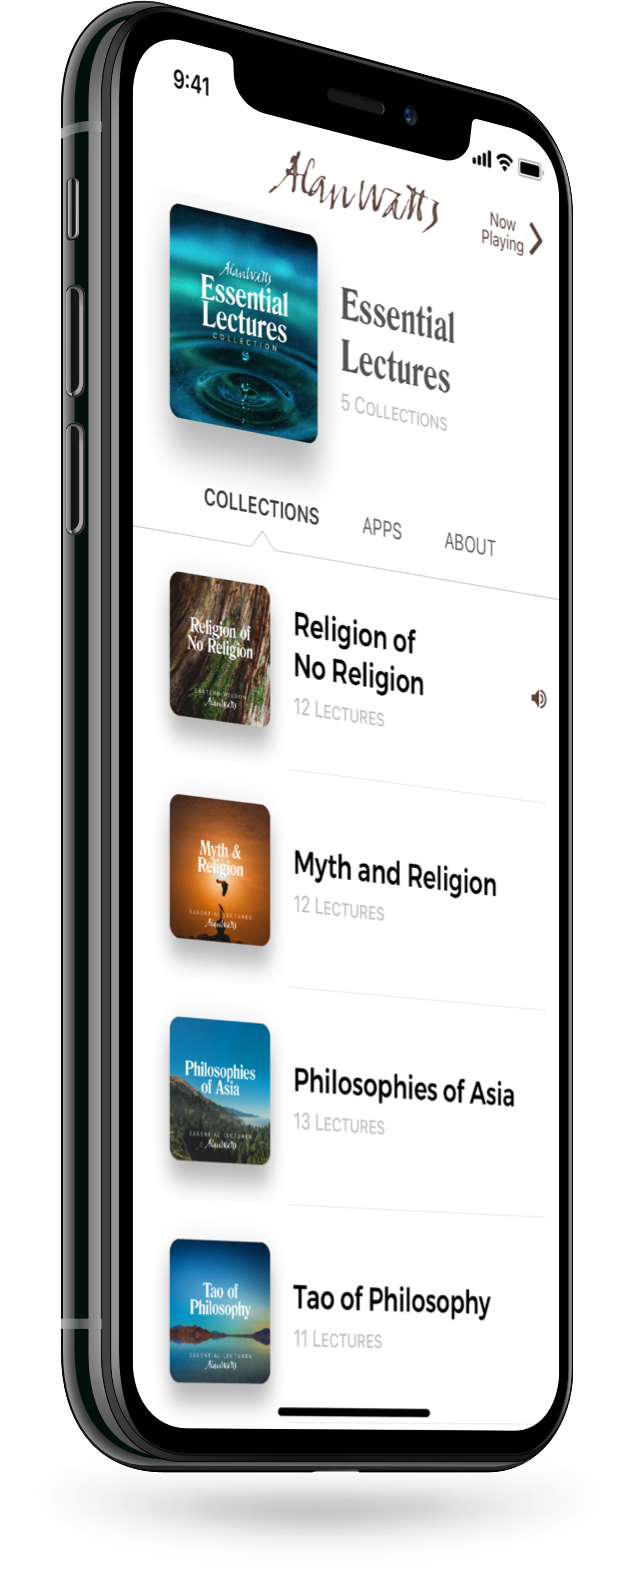 Alan Watts App for iPhone and iOS